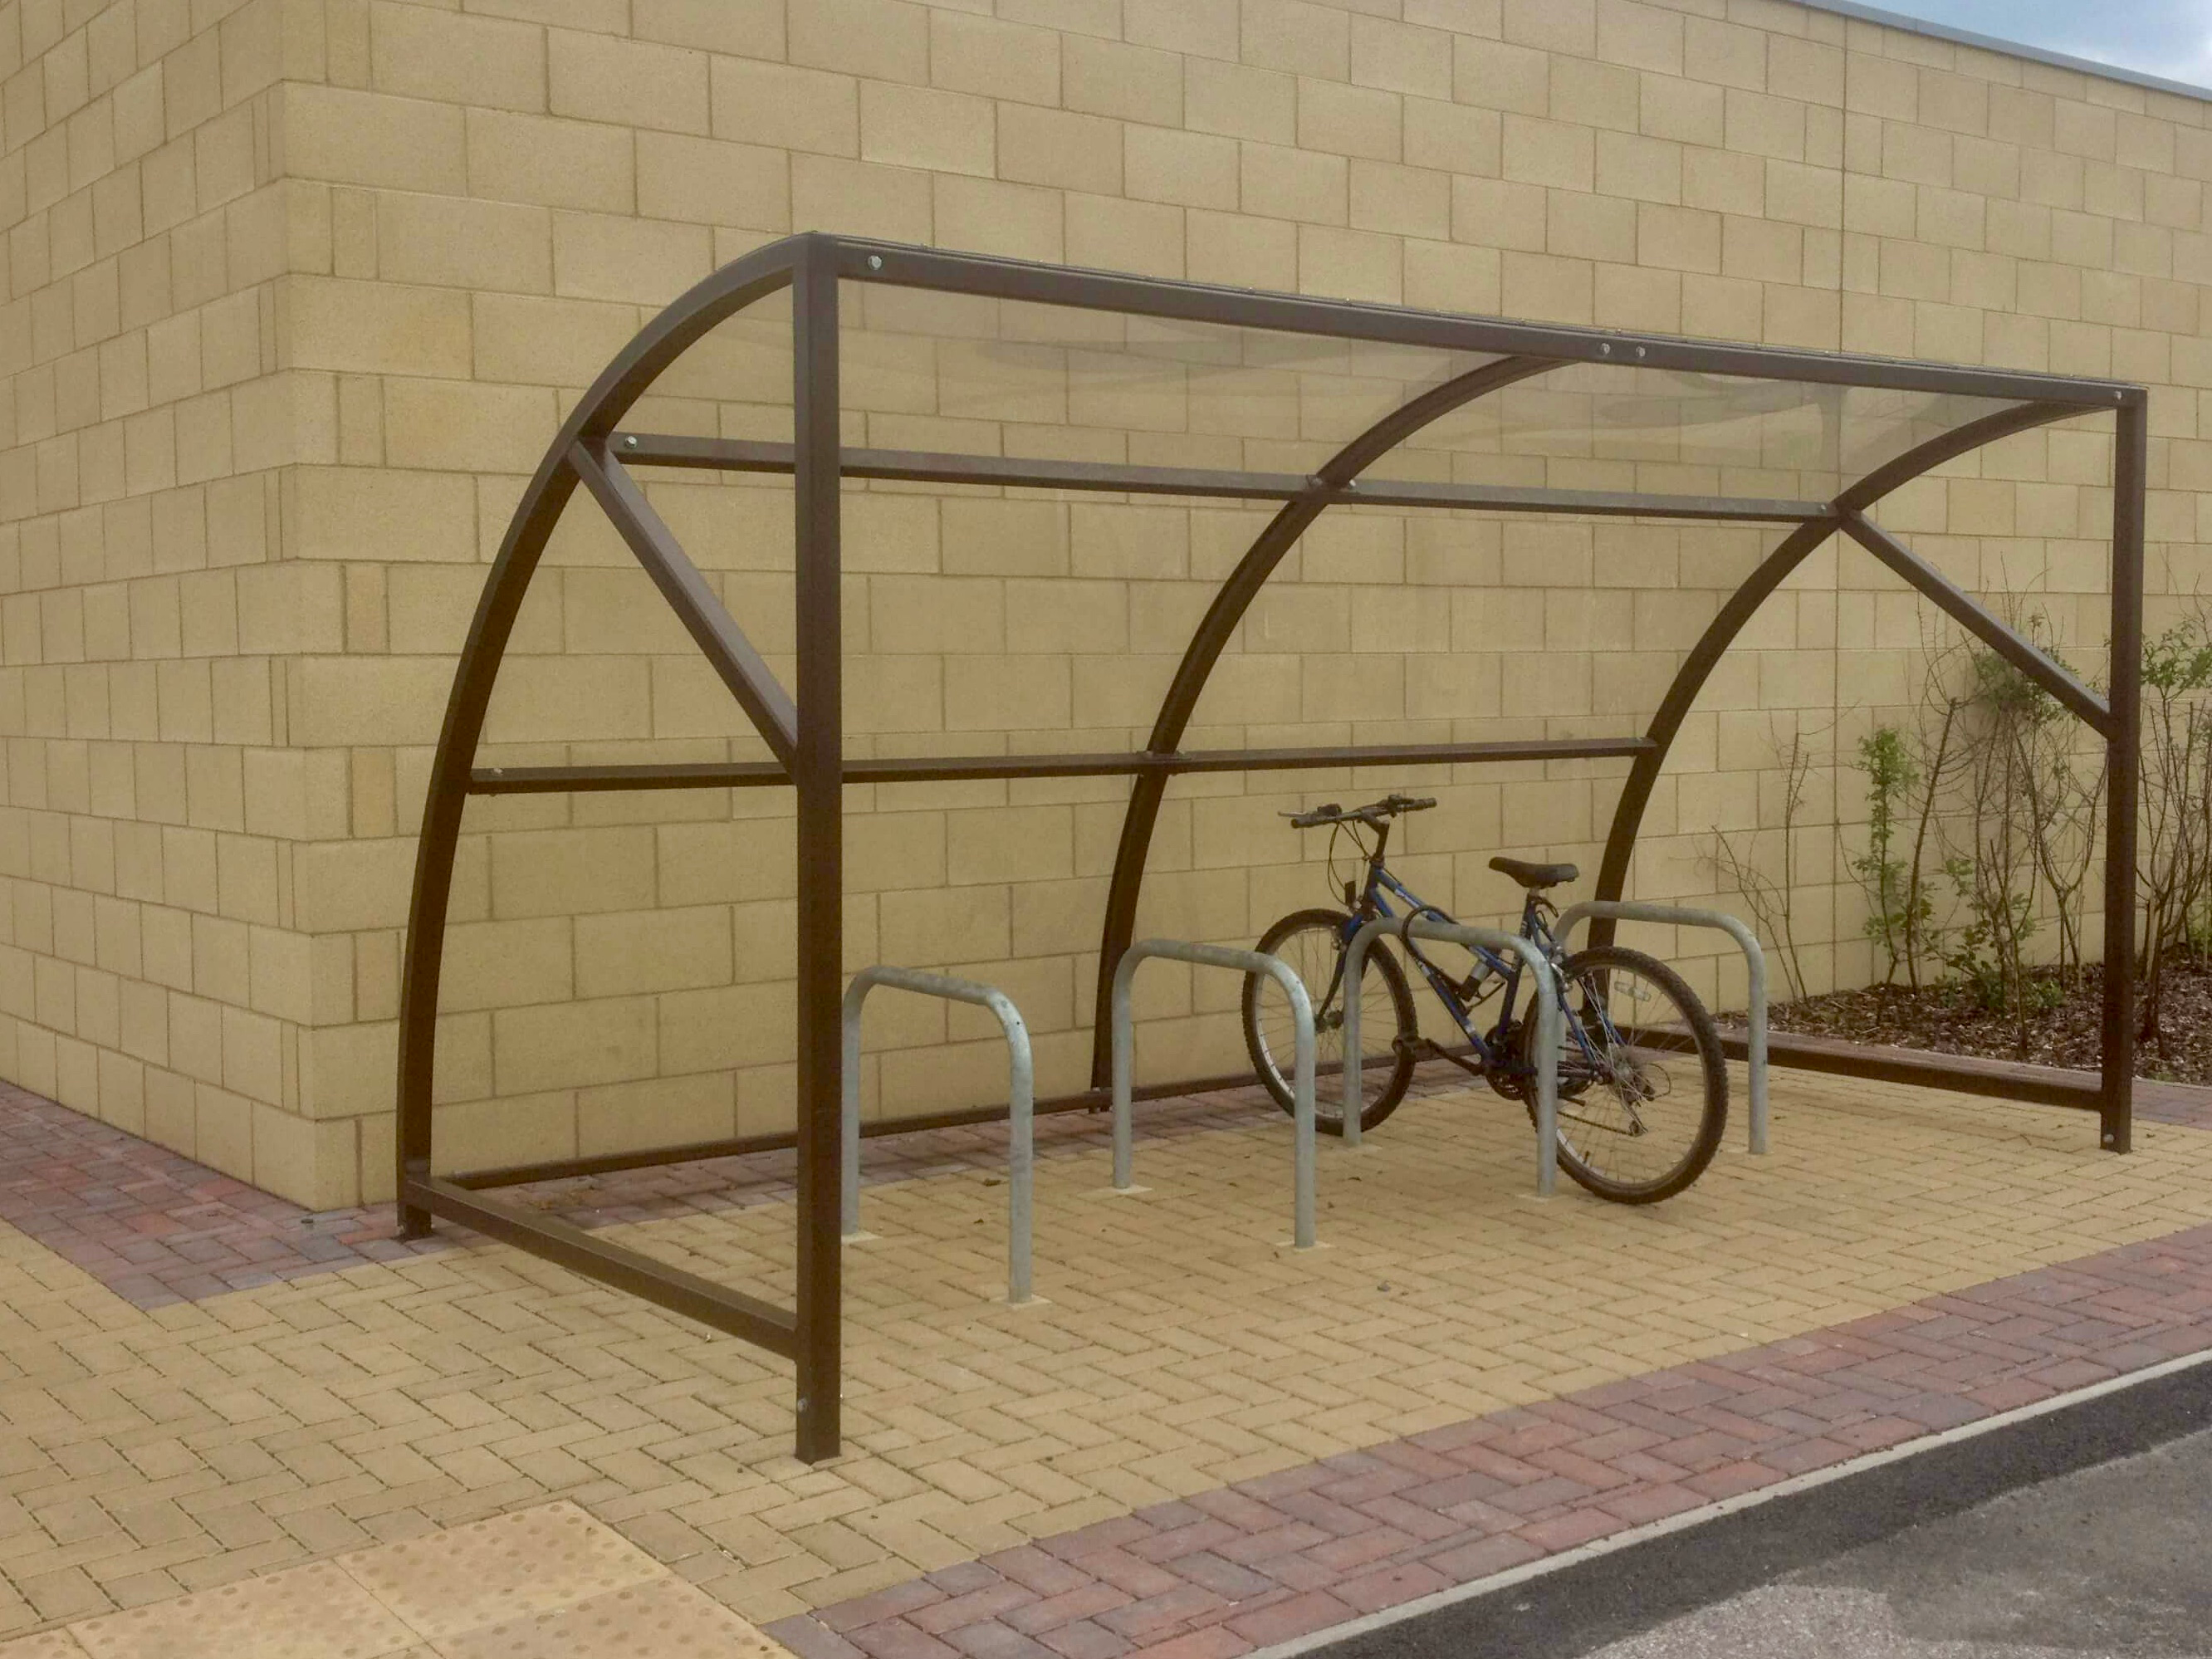 8 space original cycle shelter with galvanised Sheffield stands and bike secured